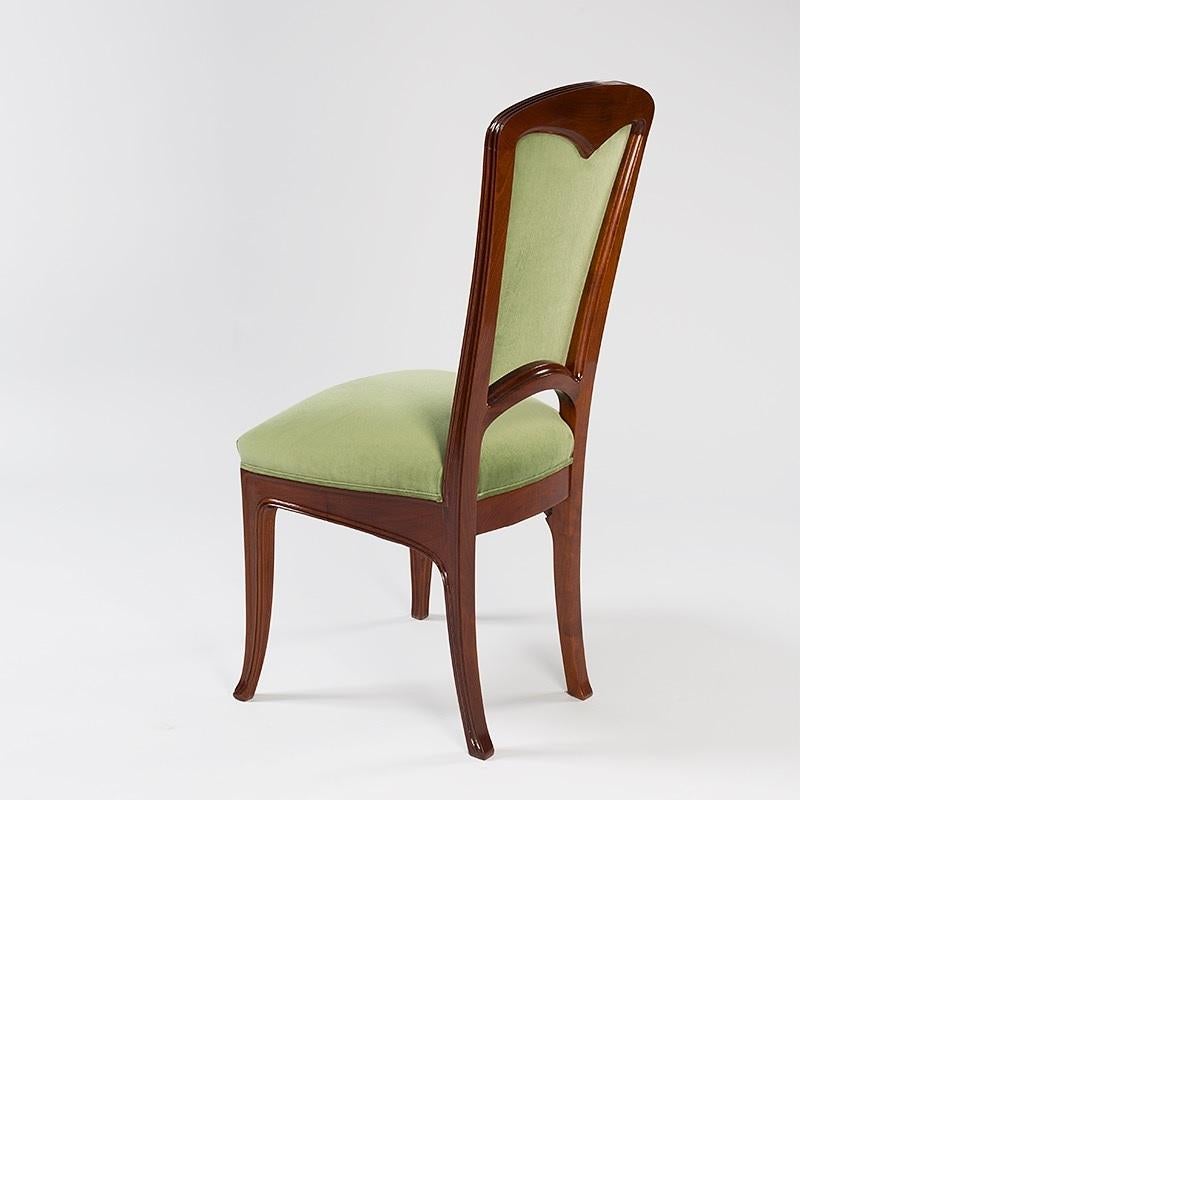 A pair of French side chairs in mahogany by Camille Gauthier & Paul Poinsignon. The chairs have carved stylized flowers on their backs, arms and below the seats. They are upholstered in green fabric.